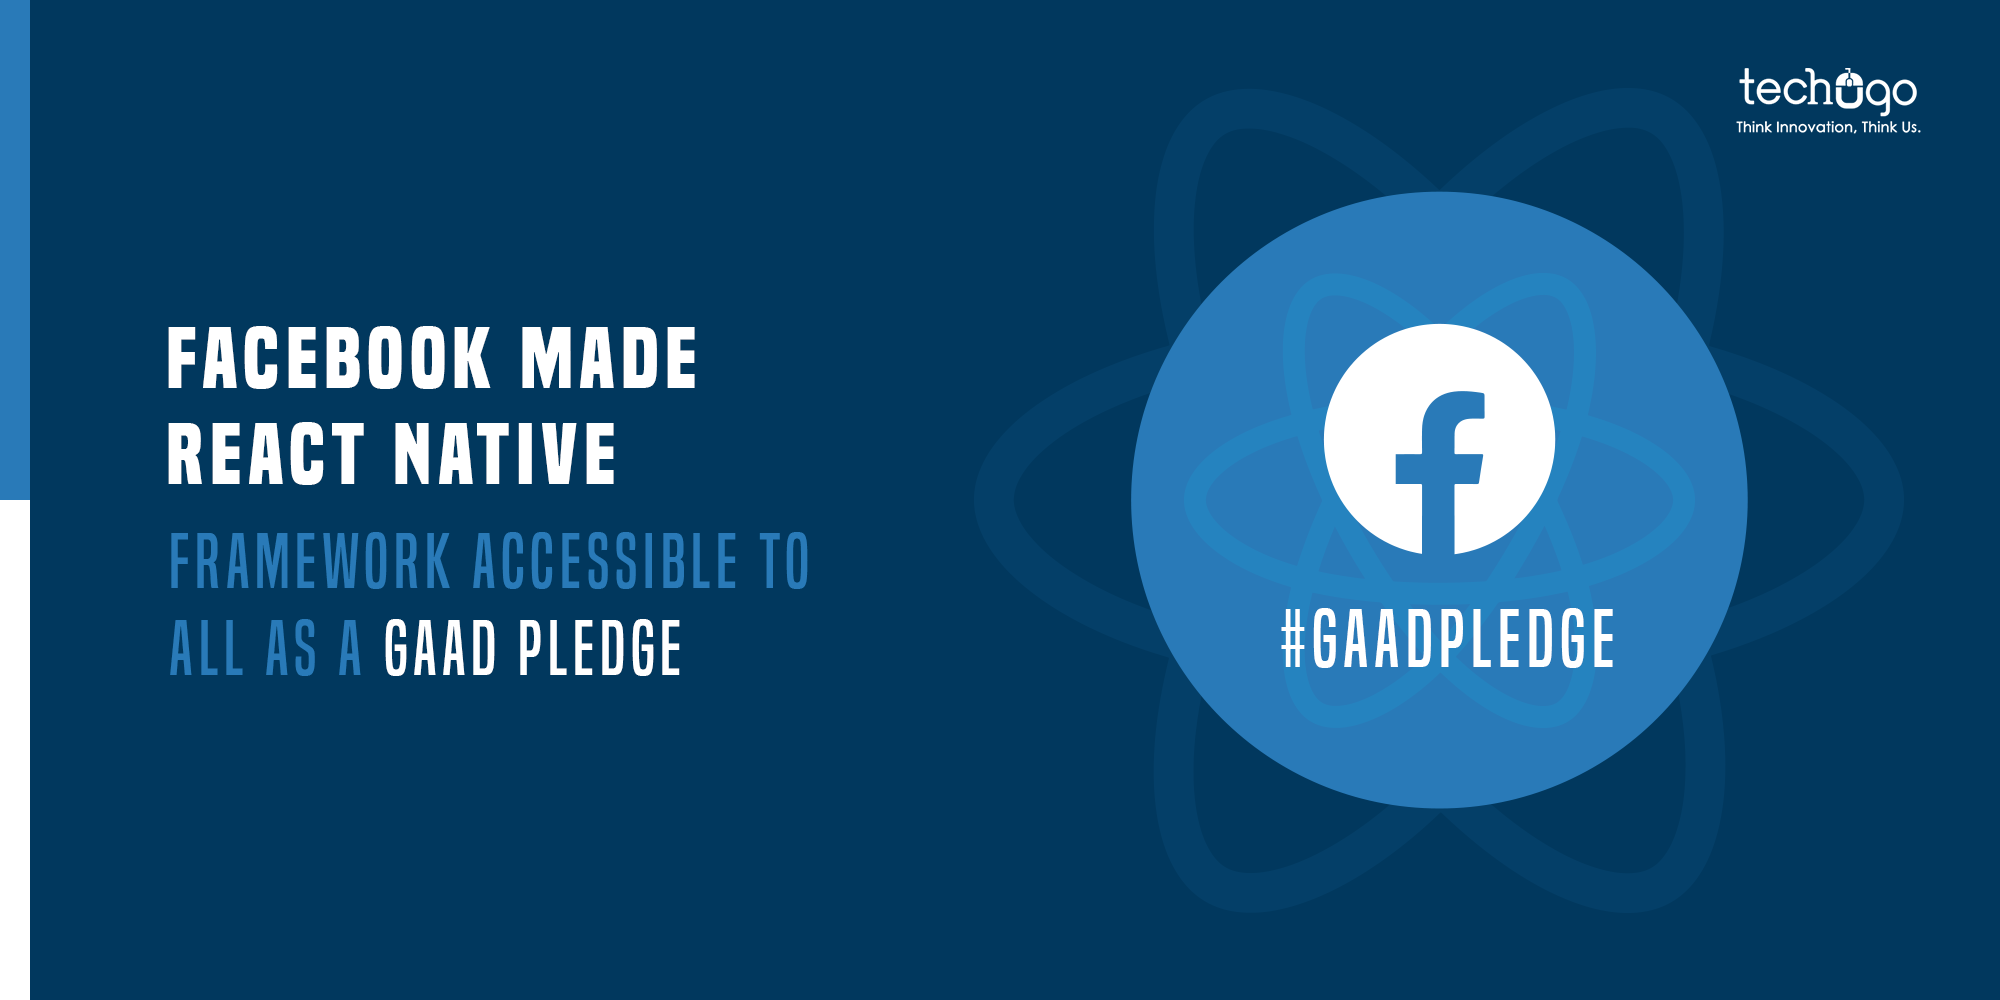 Facebook Made React Native Framework Accessible To All As A Gaad Pledge